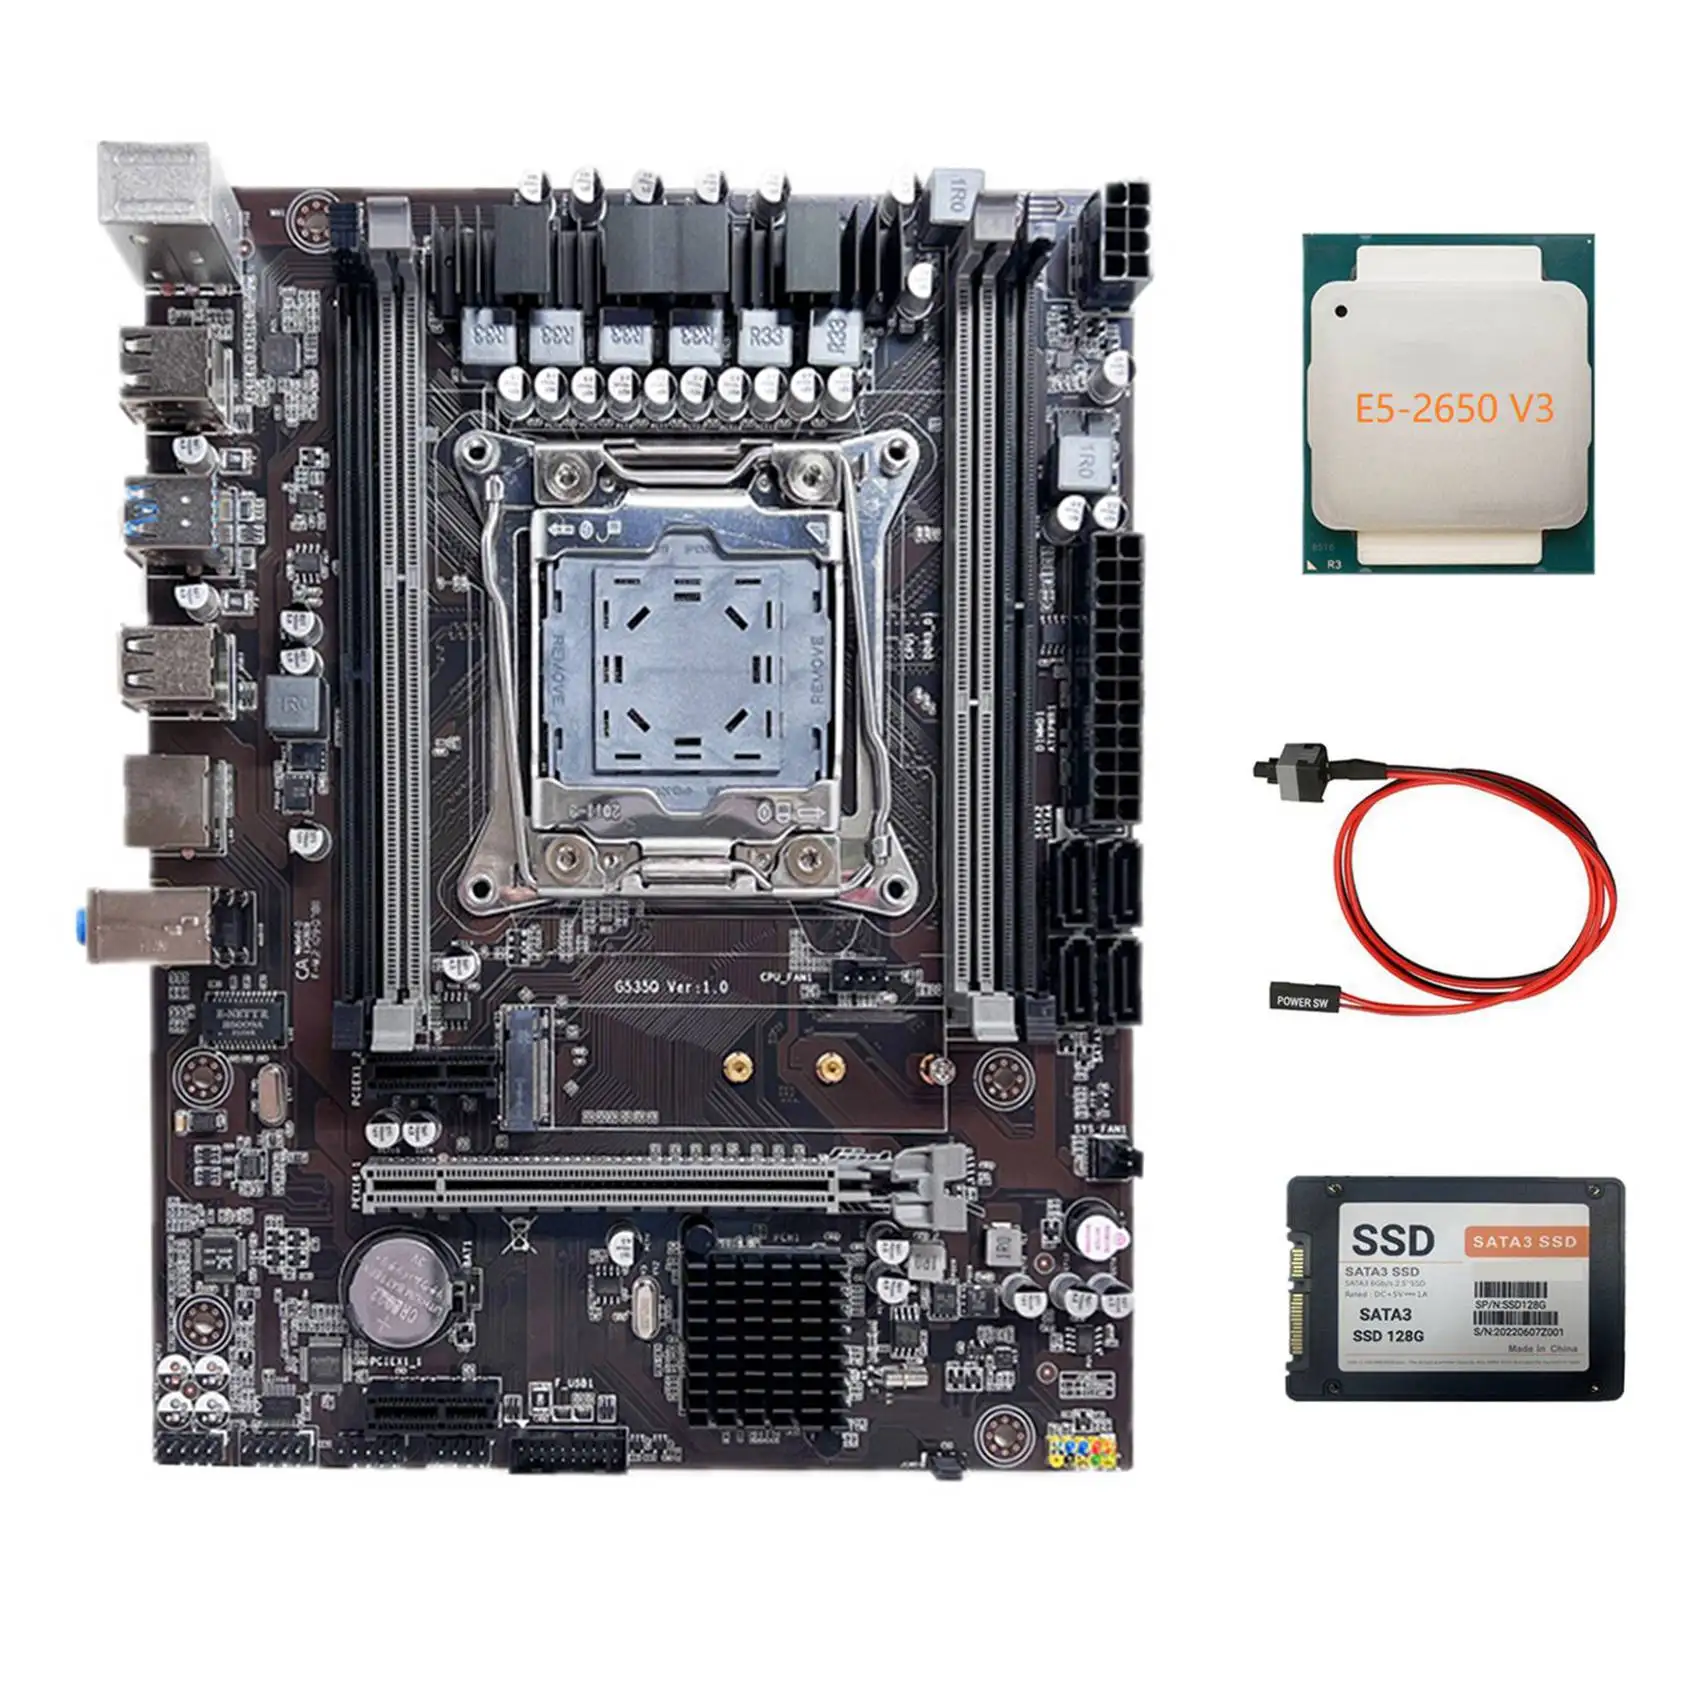 

X99 Motherboard LGA2011-3 Computer Motherboard Support DDR4 ECC RAM with E5 2650 V3 CPU+SATA3 SSD 128G+Switch Cable